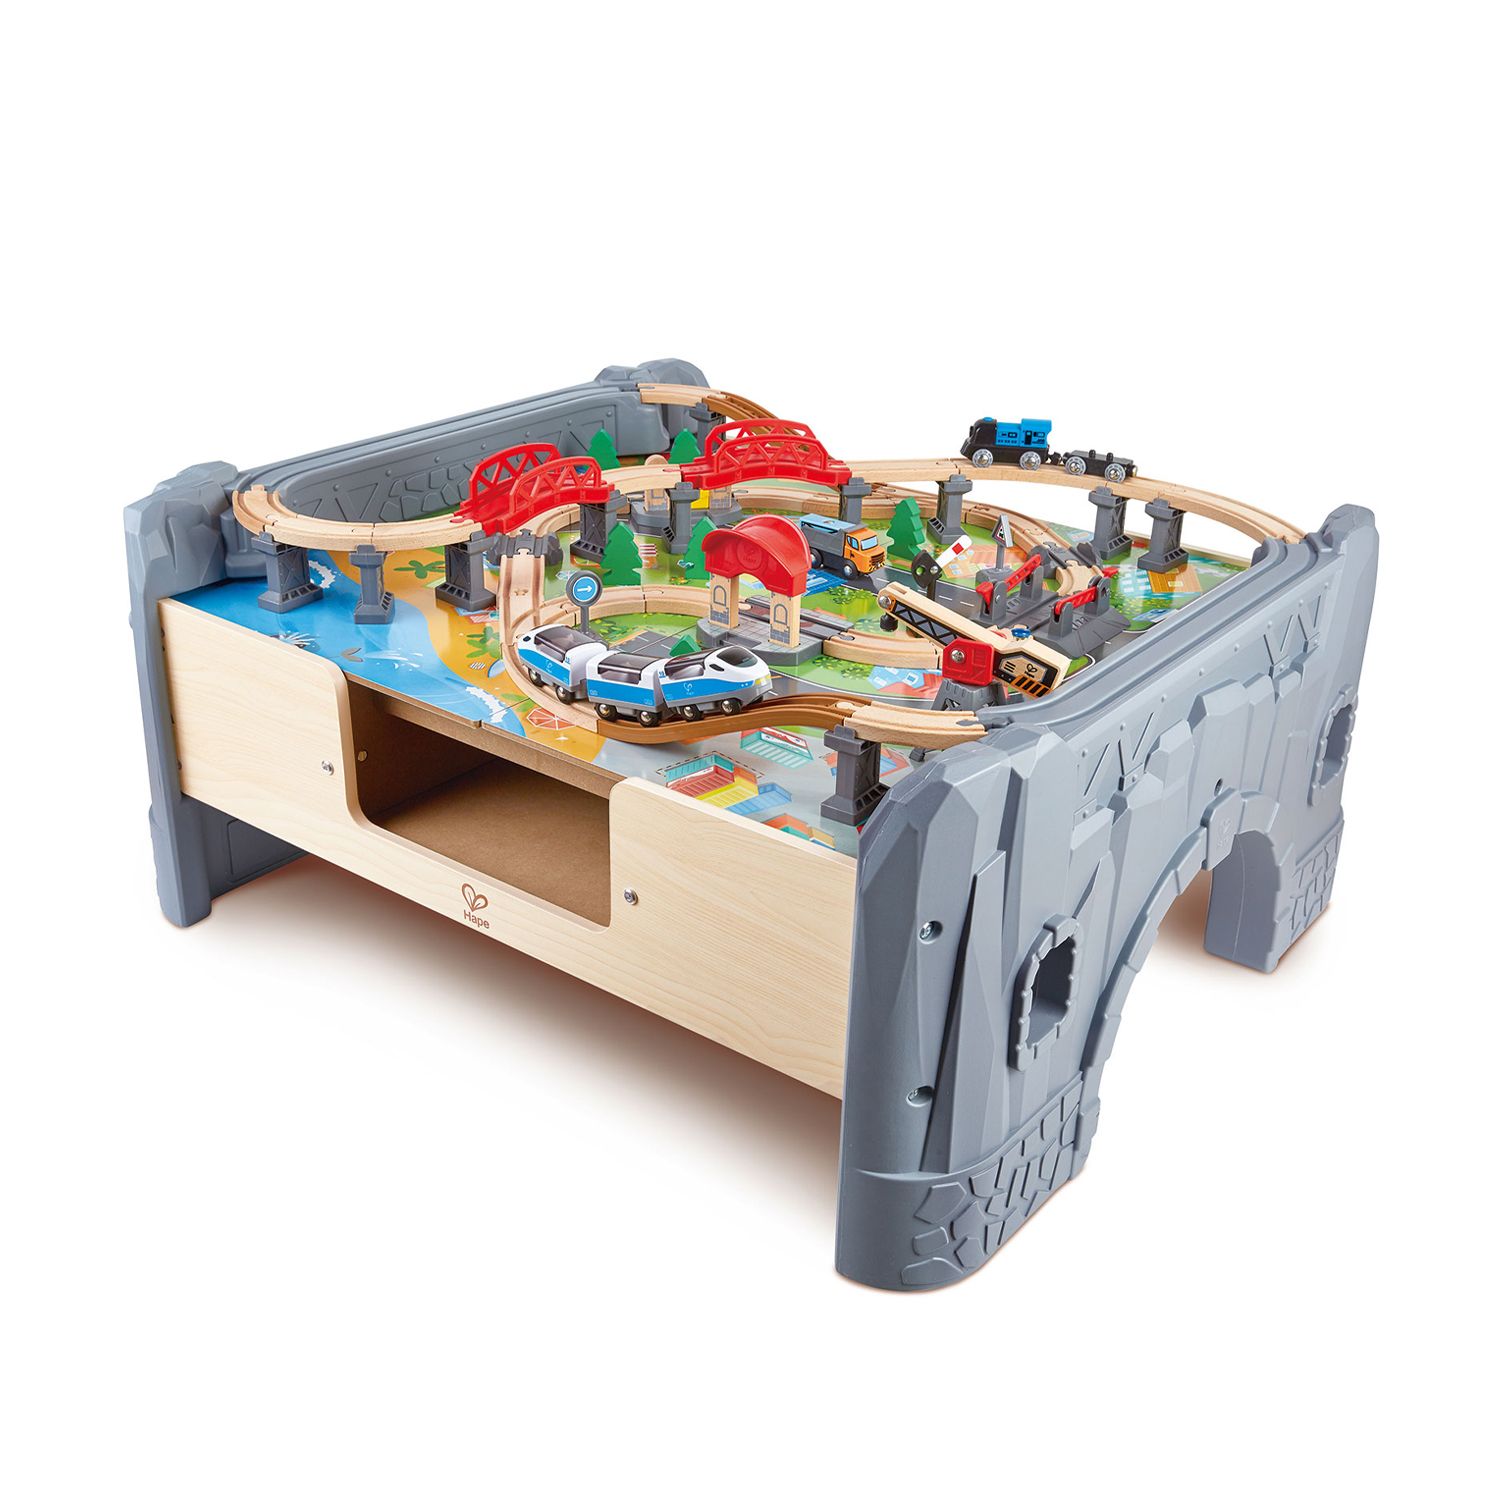 70 Piece Railway City Train Table and Set 